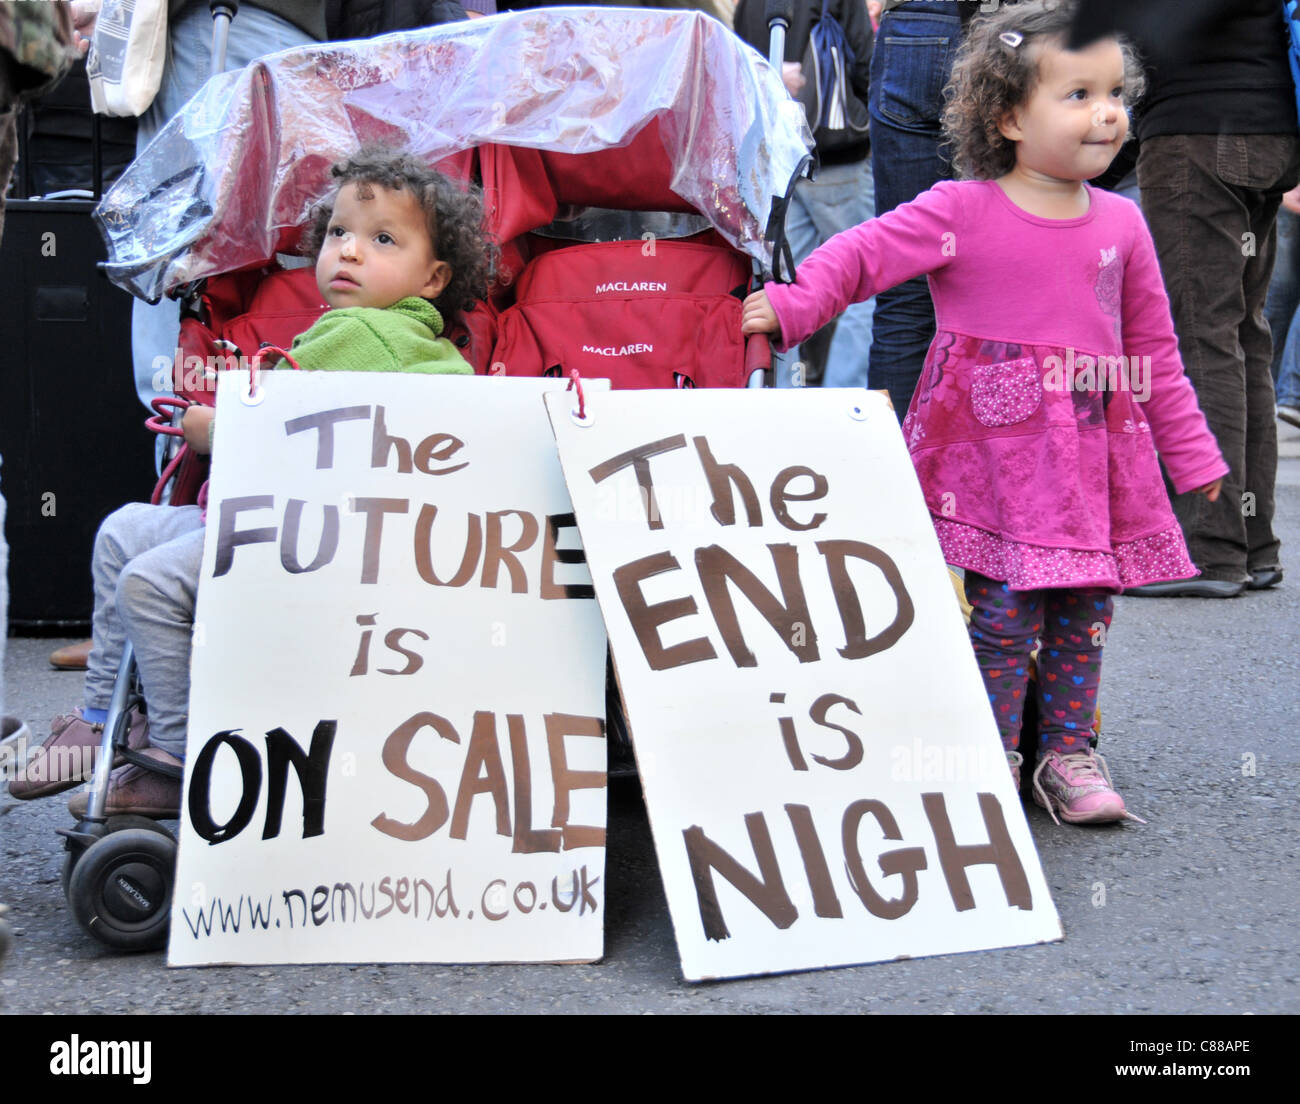 City of London, UK, 15/10/2011. Children with banners and slogans at the Occupy London protest Stock Photo